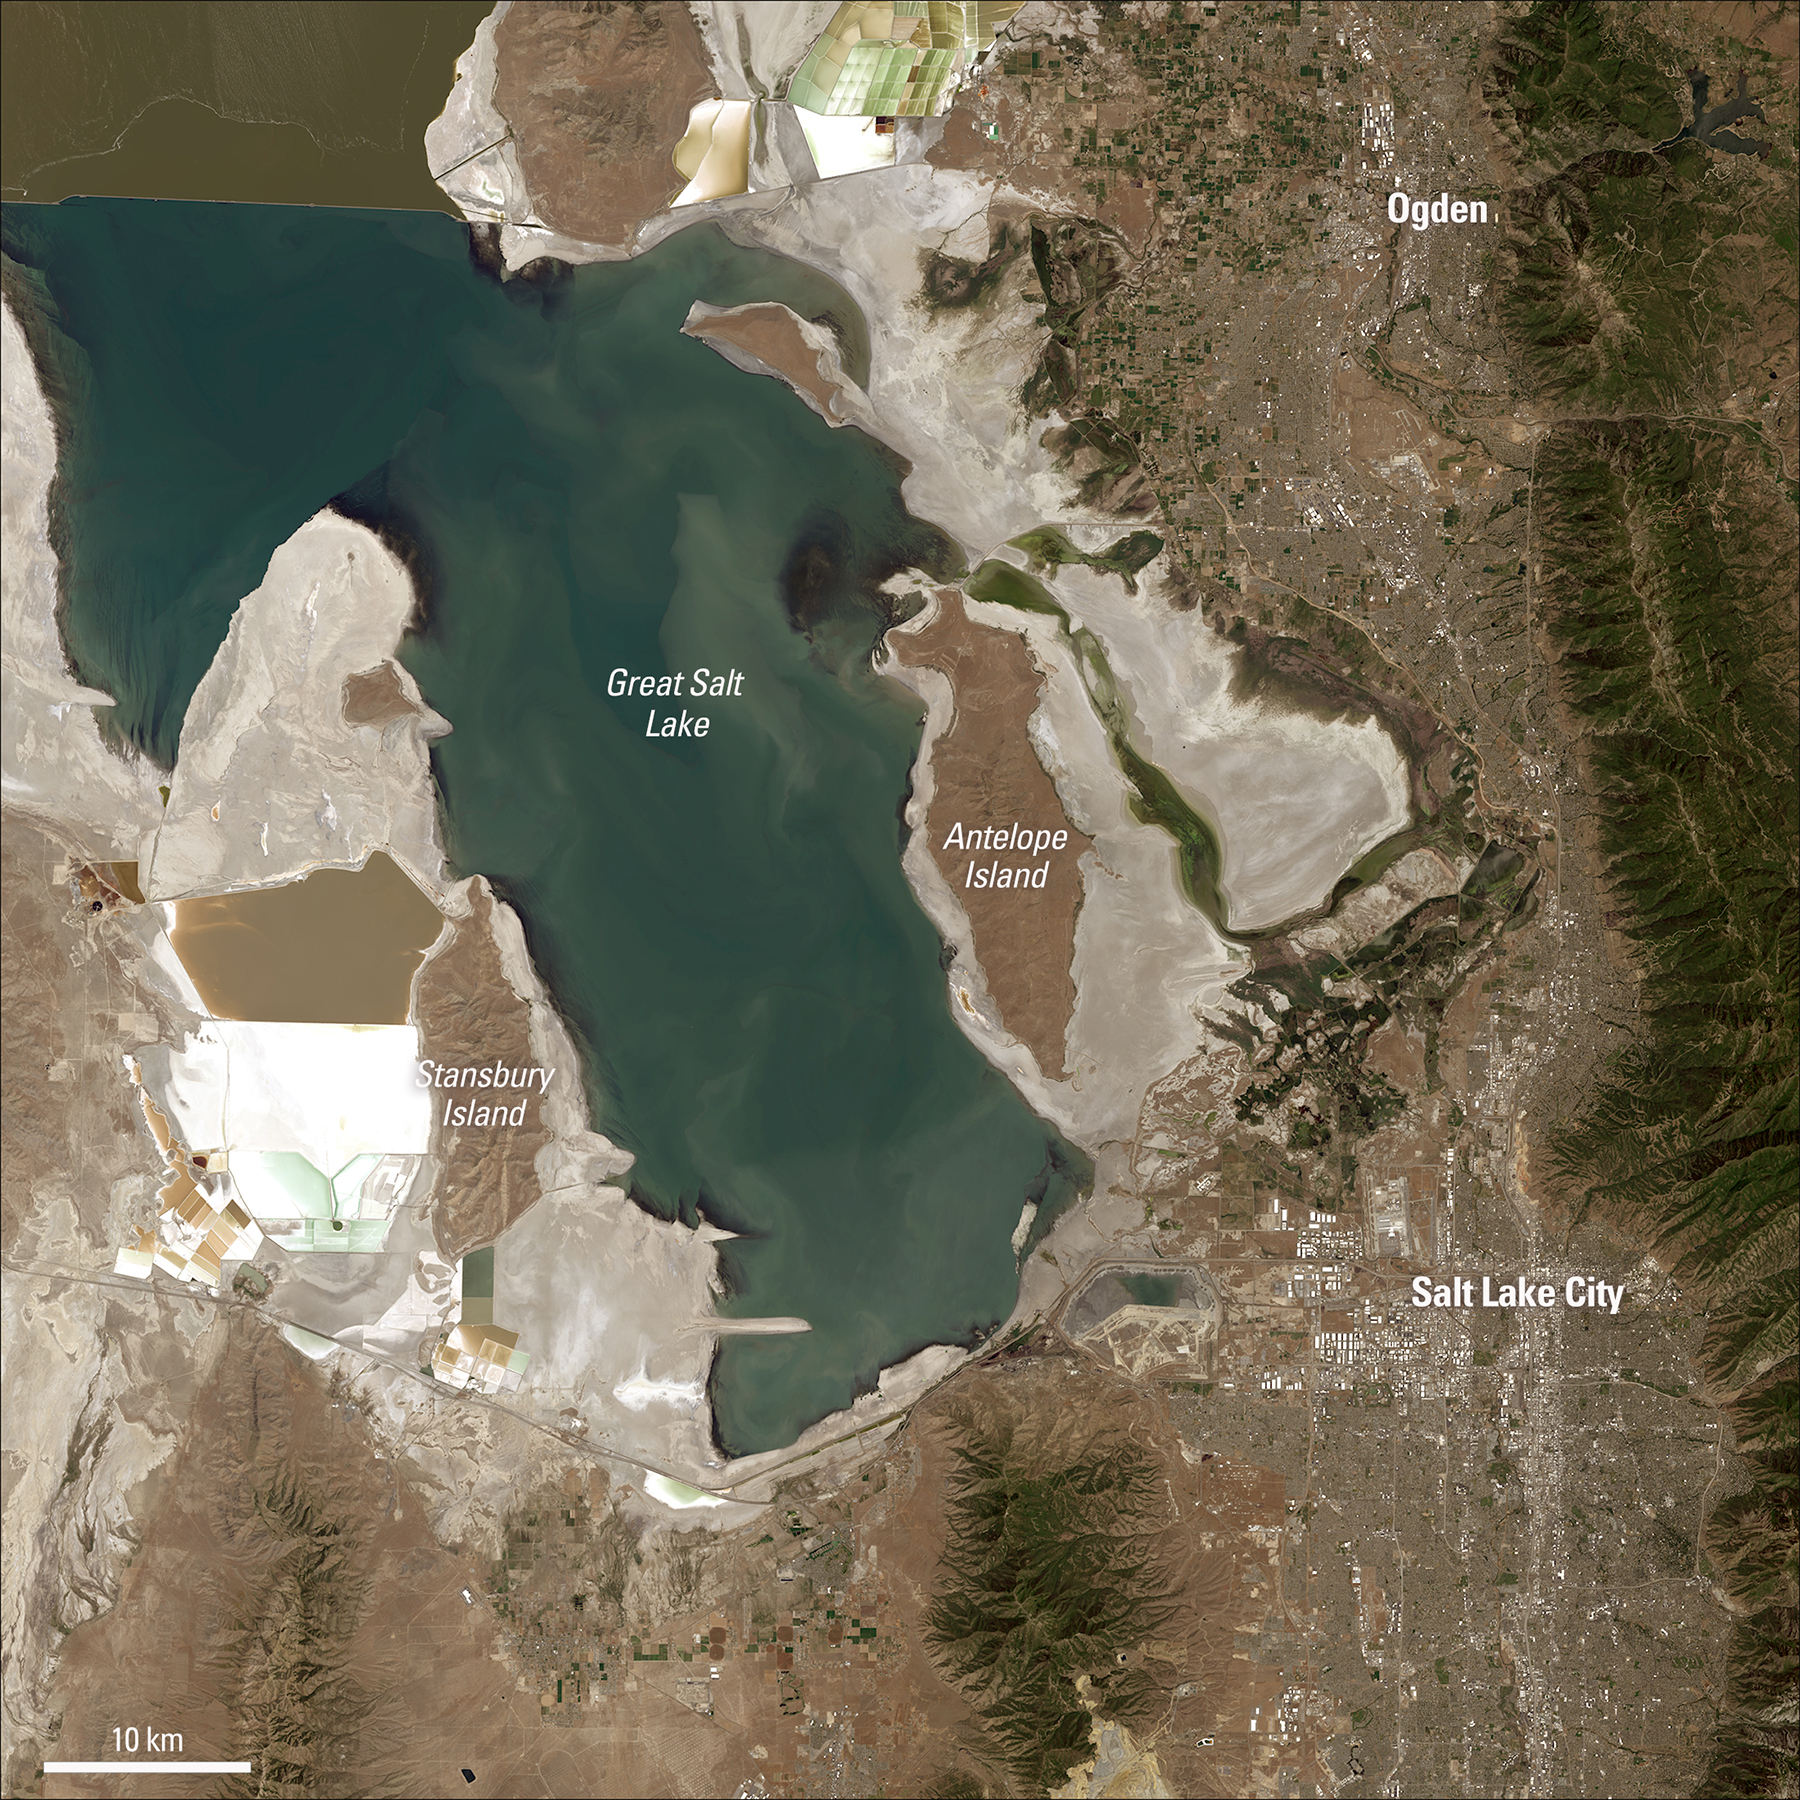 In early July 2022, the Great Salt Lake had dropped to an elevation of 4,190.1 feet, as measured by a gauge at the southern end of the lake. At the time, this elevation was the lowest since data recording began in 1847. (Image courtesy of Michelle Bouchard using Landsat data from the U.S. Geological Survey)